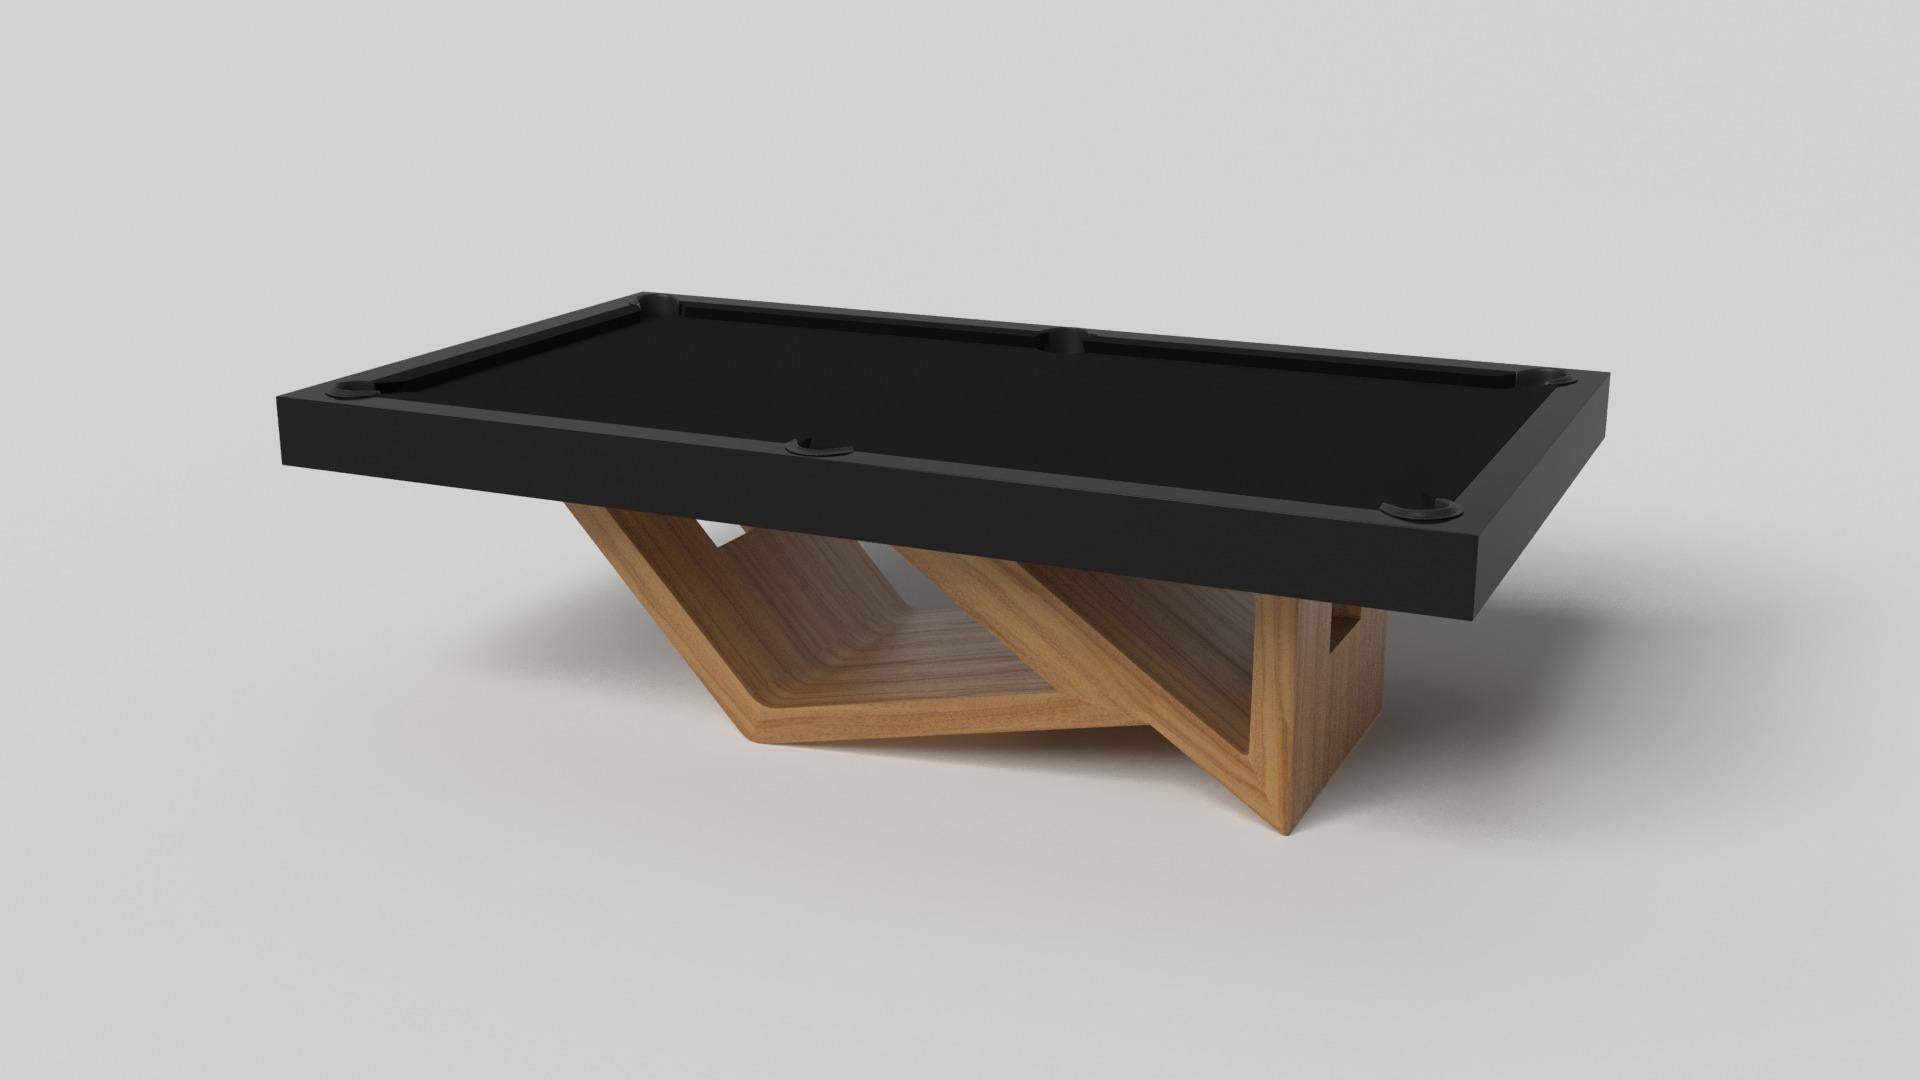 Drawing inspiration from the beauty of geometric forms, the Rumba pool table in brushed aluminum is characterized by a series of hollow and solid shapes that form an offset asymmetric base. Accented with a felt top for professional game play, this